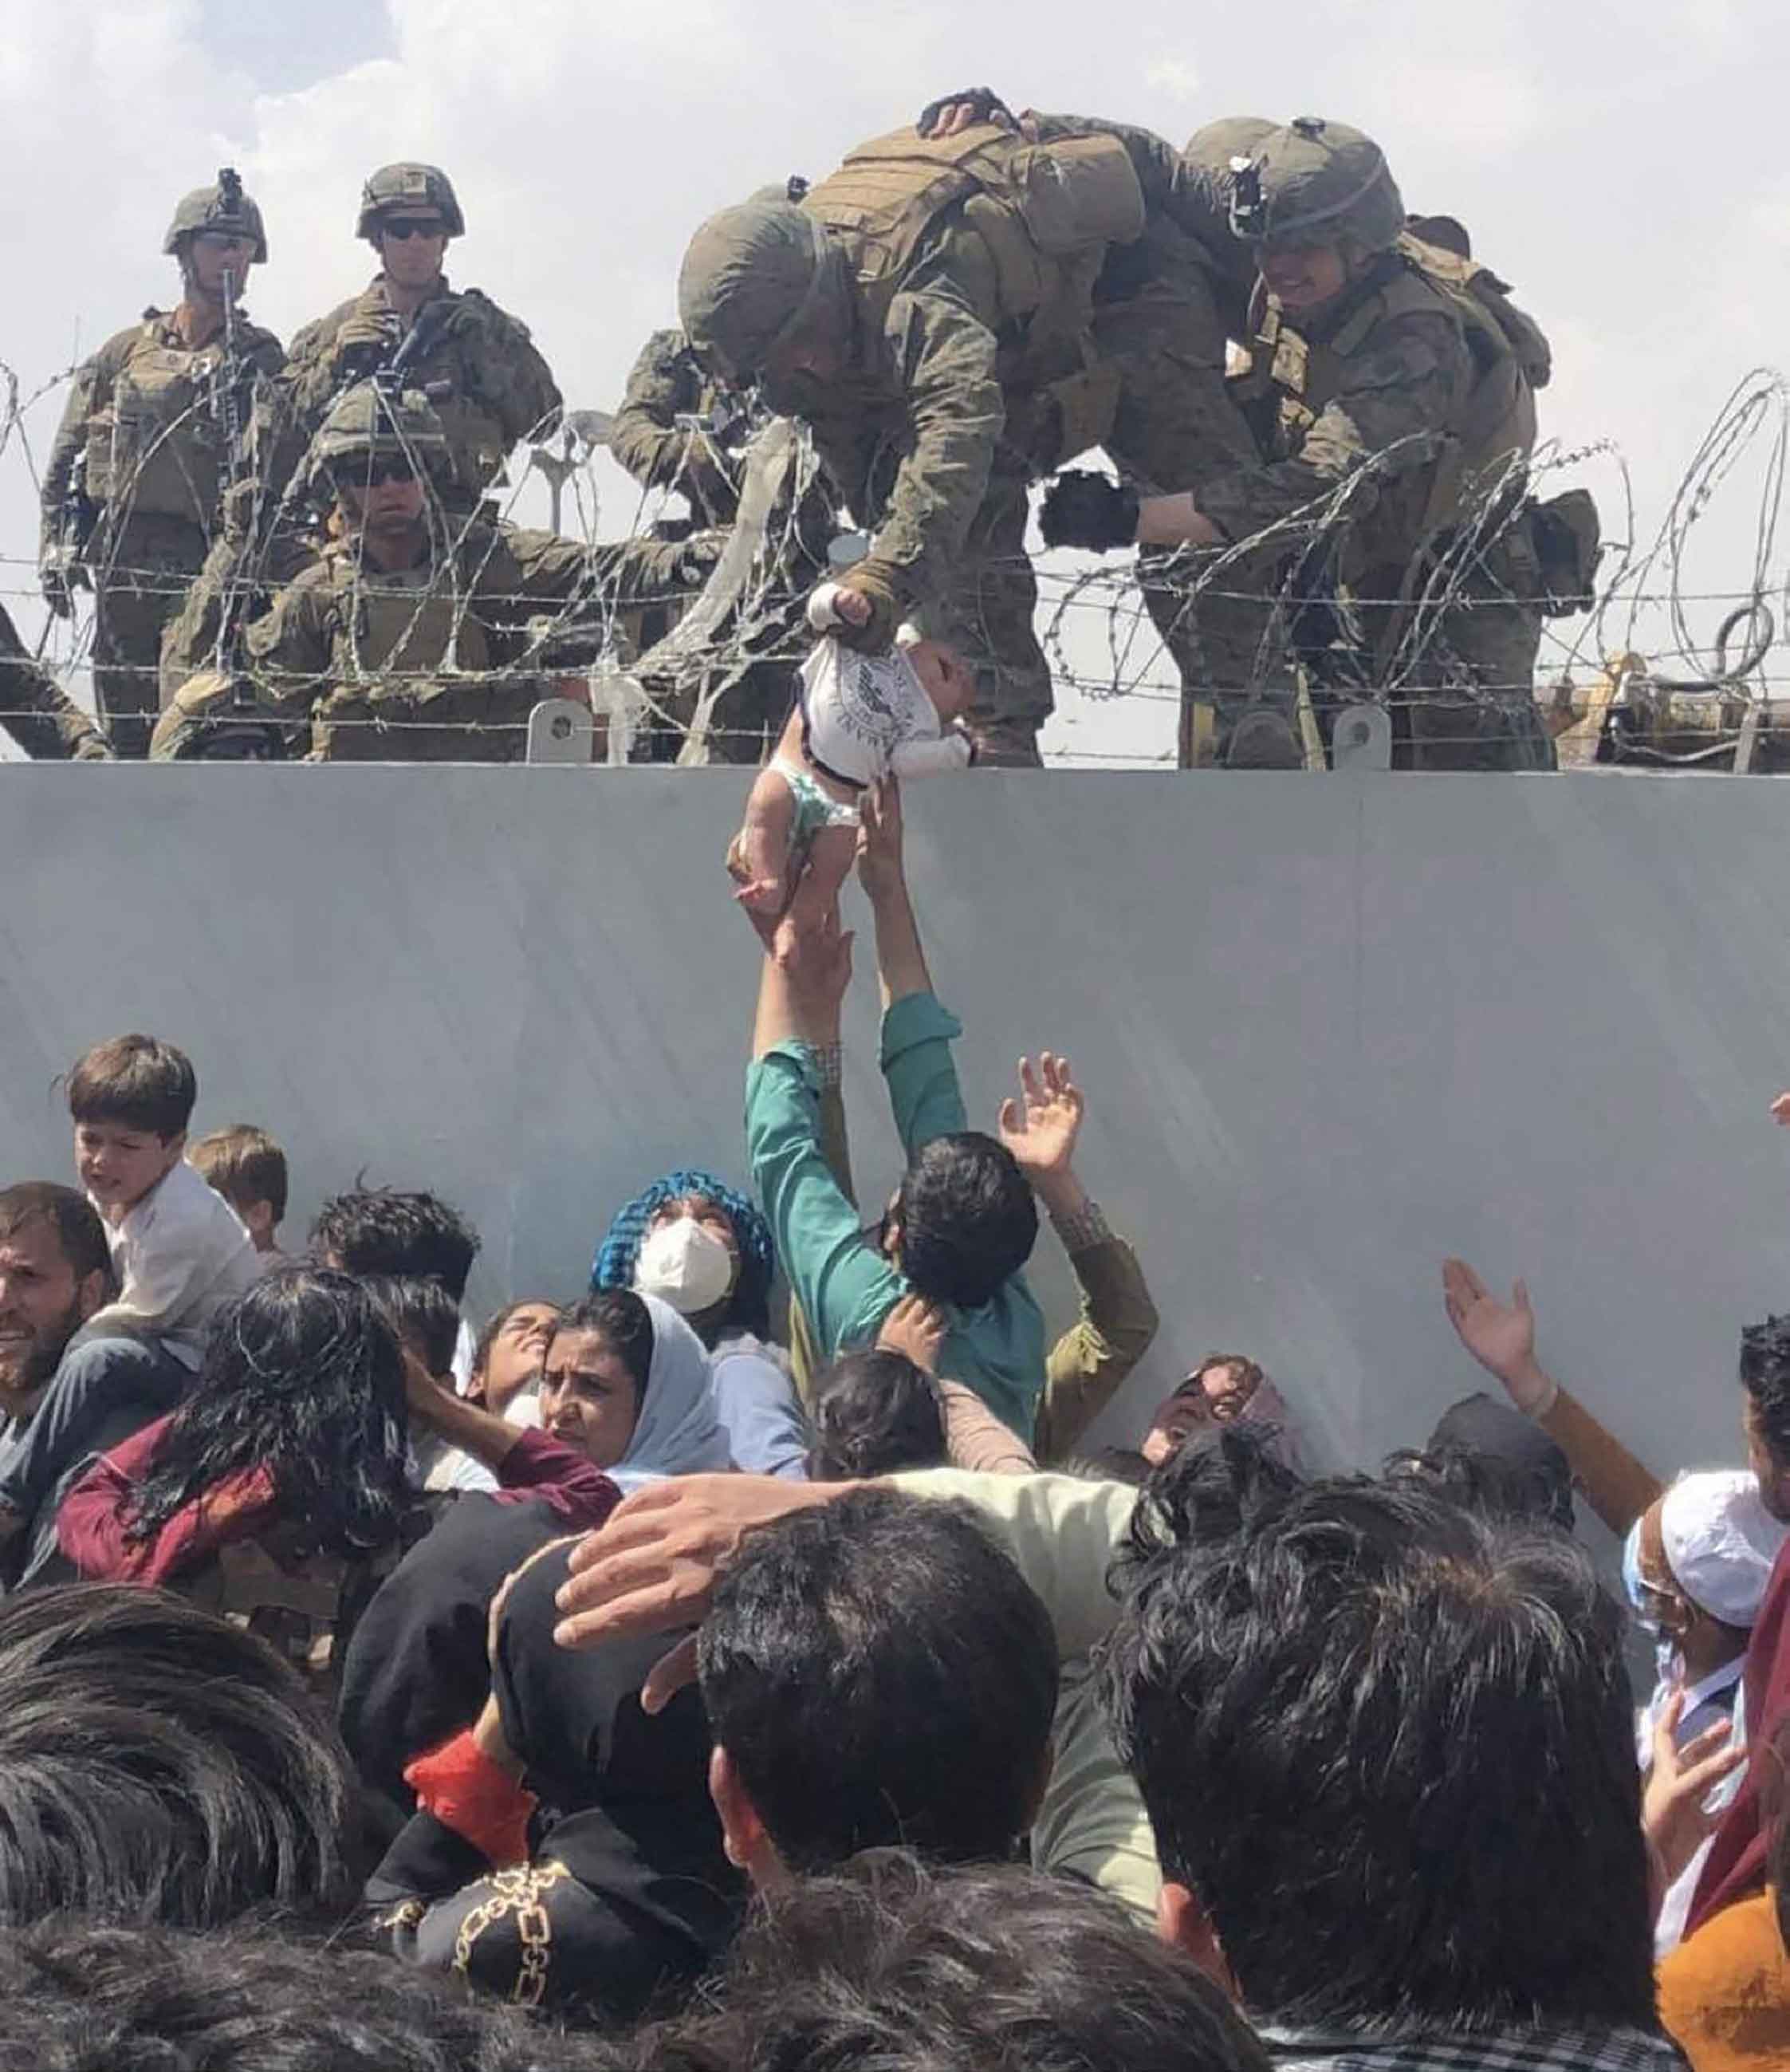 This image taken by Omar Kaidiri and made available to AFP on August 20 shows a US Marine grabbing an infant over a fence of barbed wire during an evacuation at Hamid Karzai International Airport in Kabul on August 19, 2021. — AFP